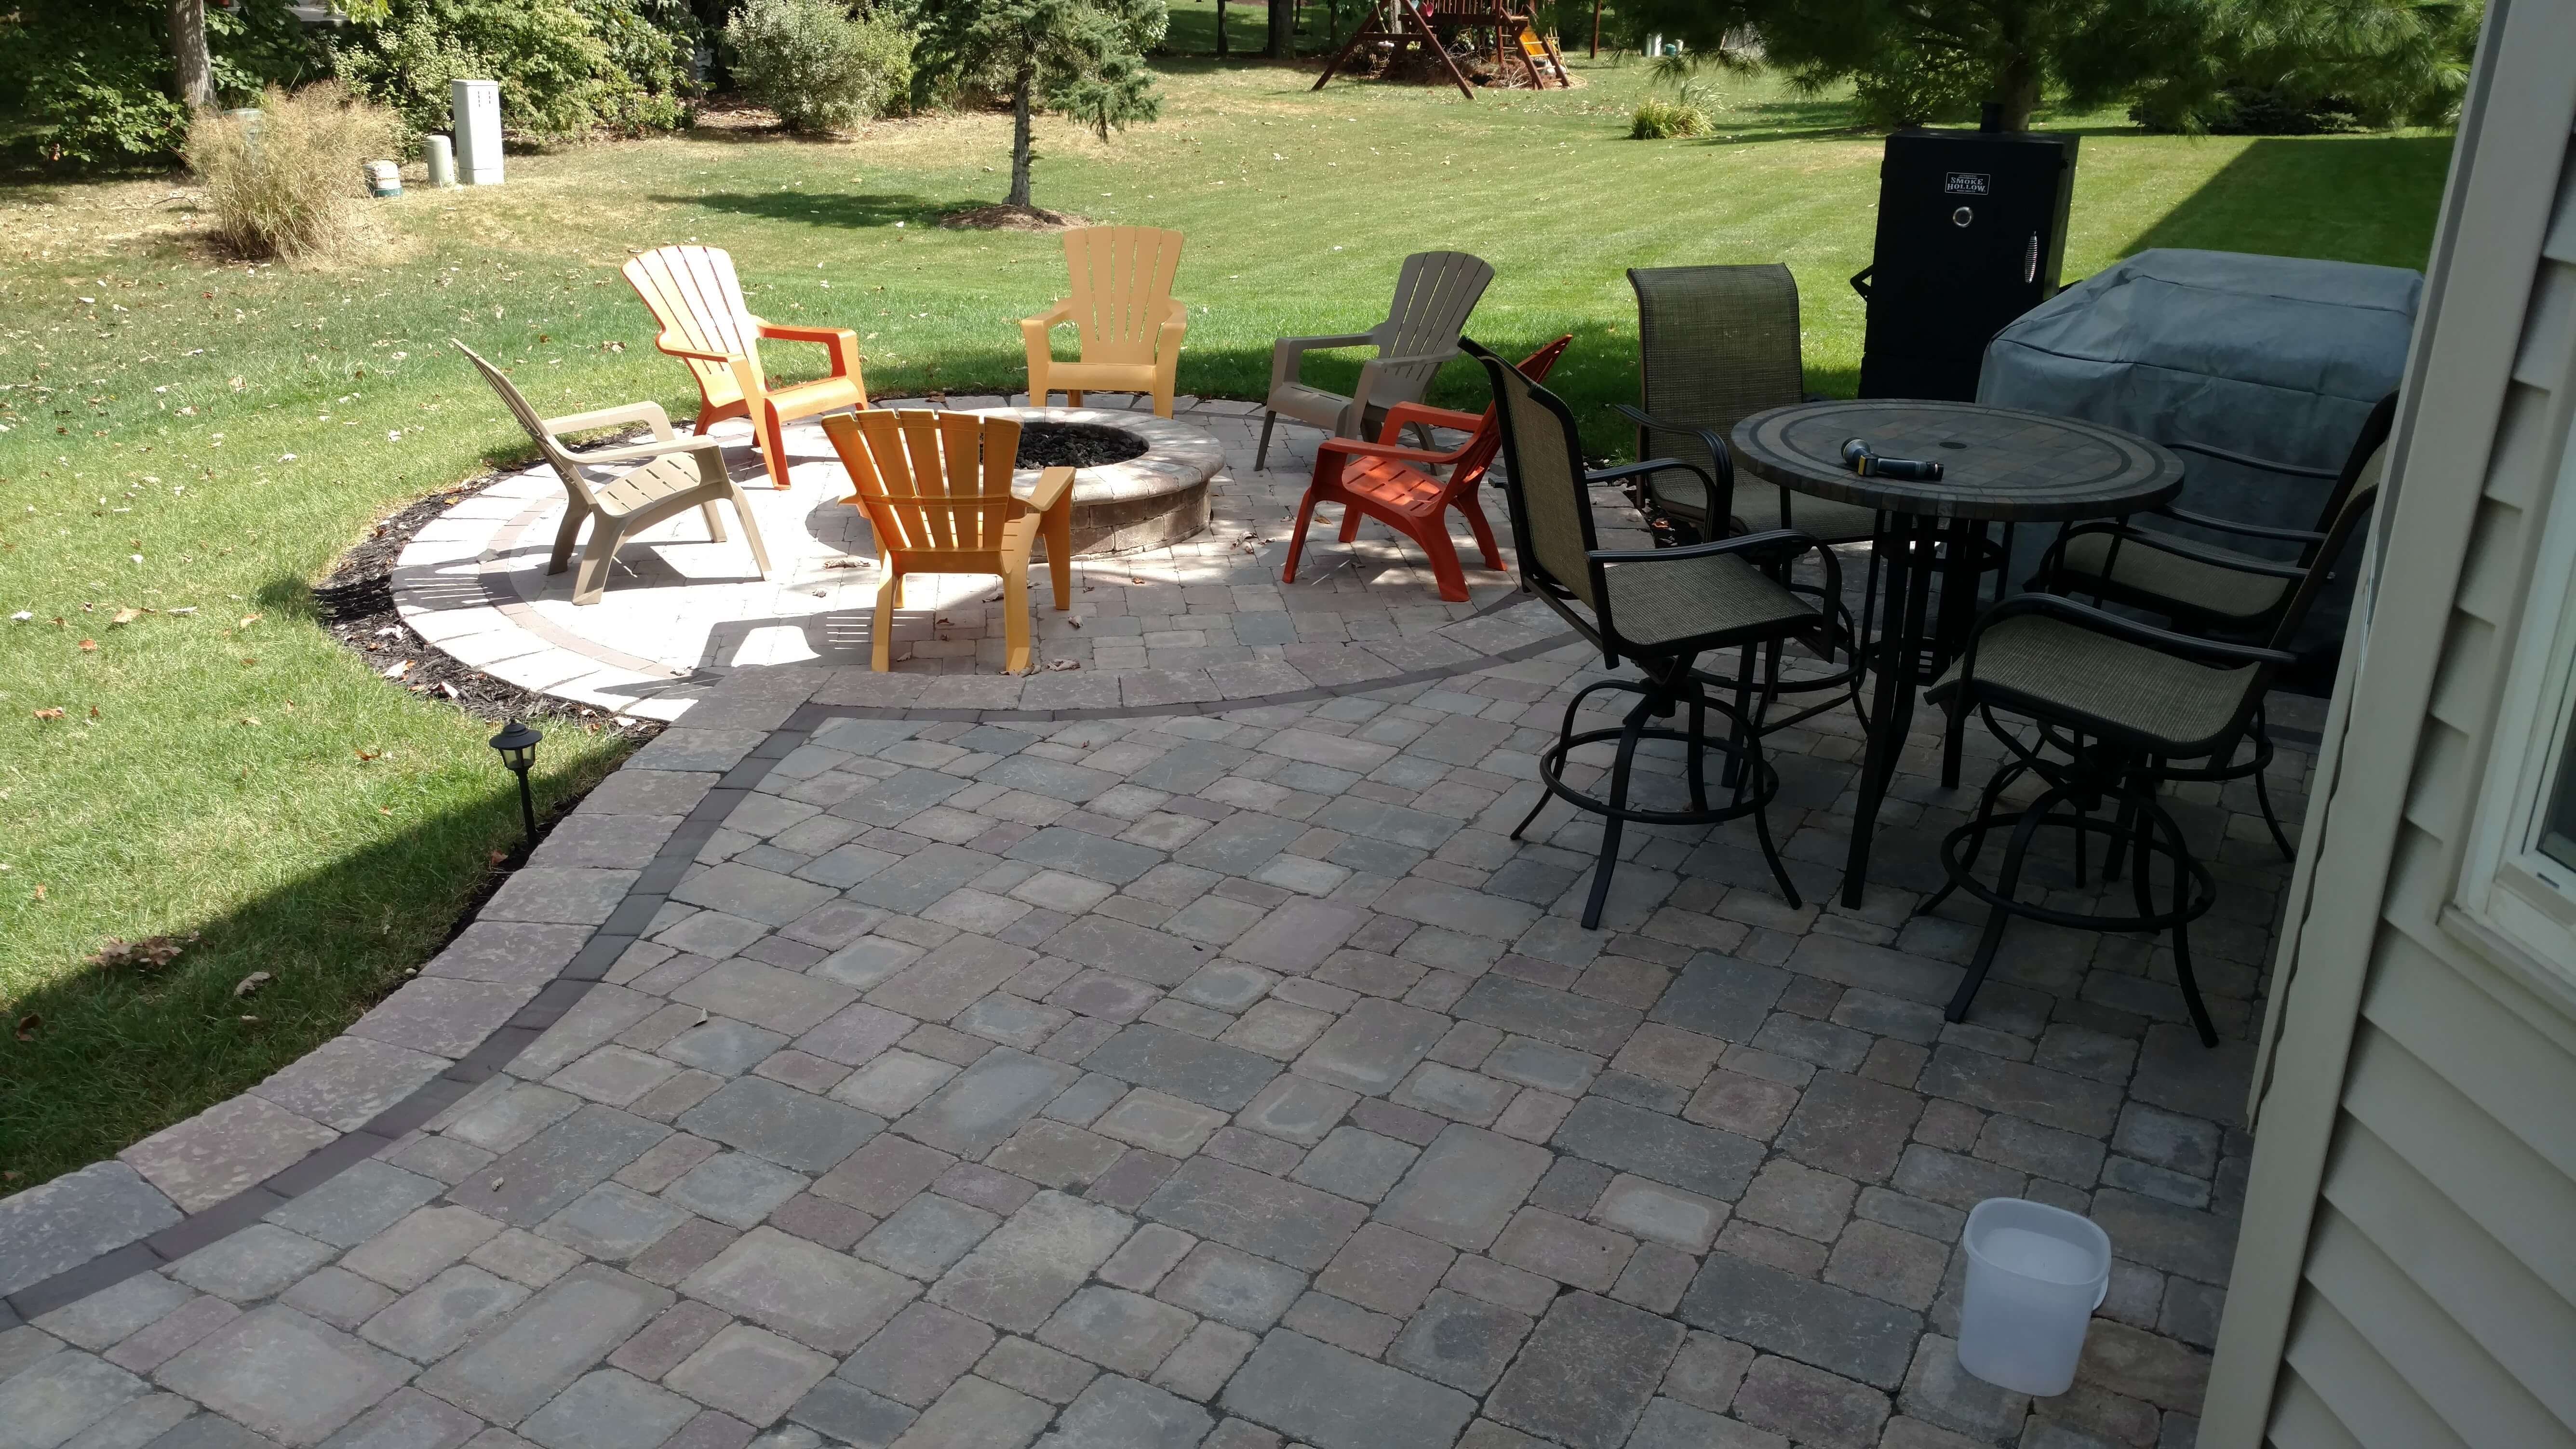 Patio and fire pit